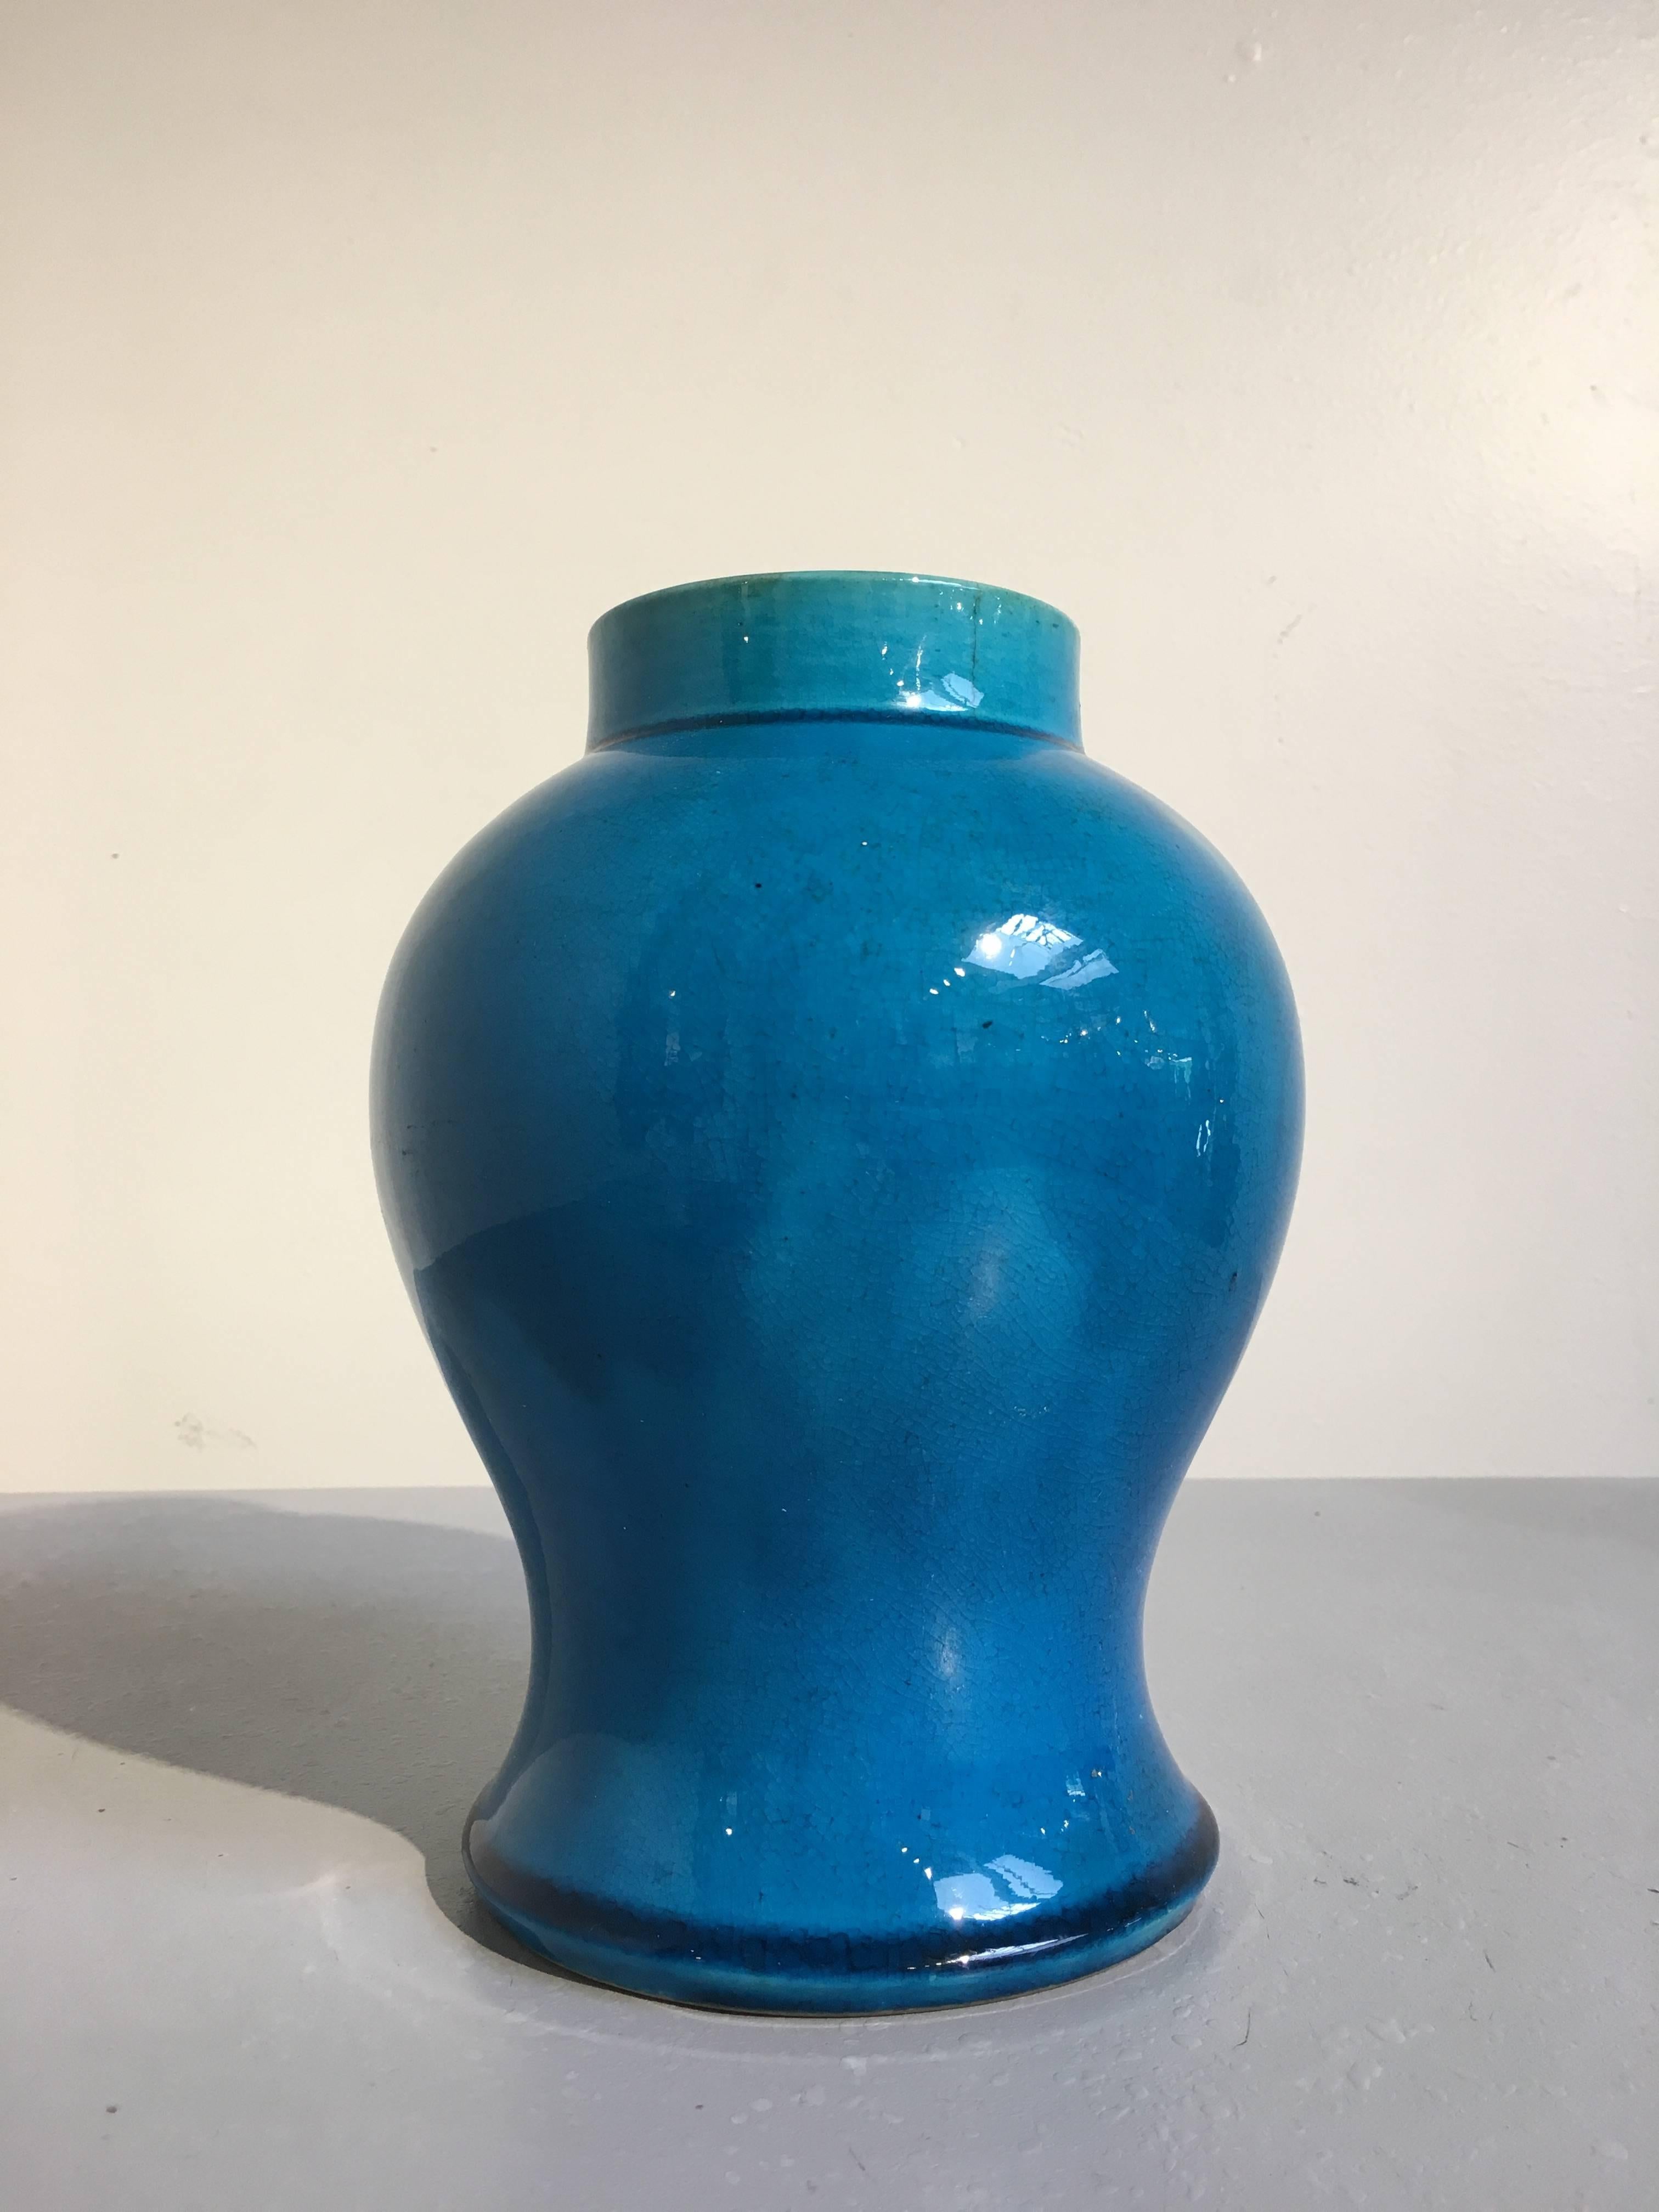 An elegant Chinese late Qing dynasty monochrome turquoise glazed baluster vase. The vase of voluptous form, with a splayed foot, narrow waist, high shoulders and short neck. The glaze of bright turquoise, pooling darker at the foot and shoulder, and